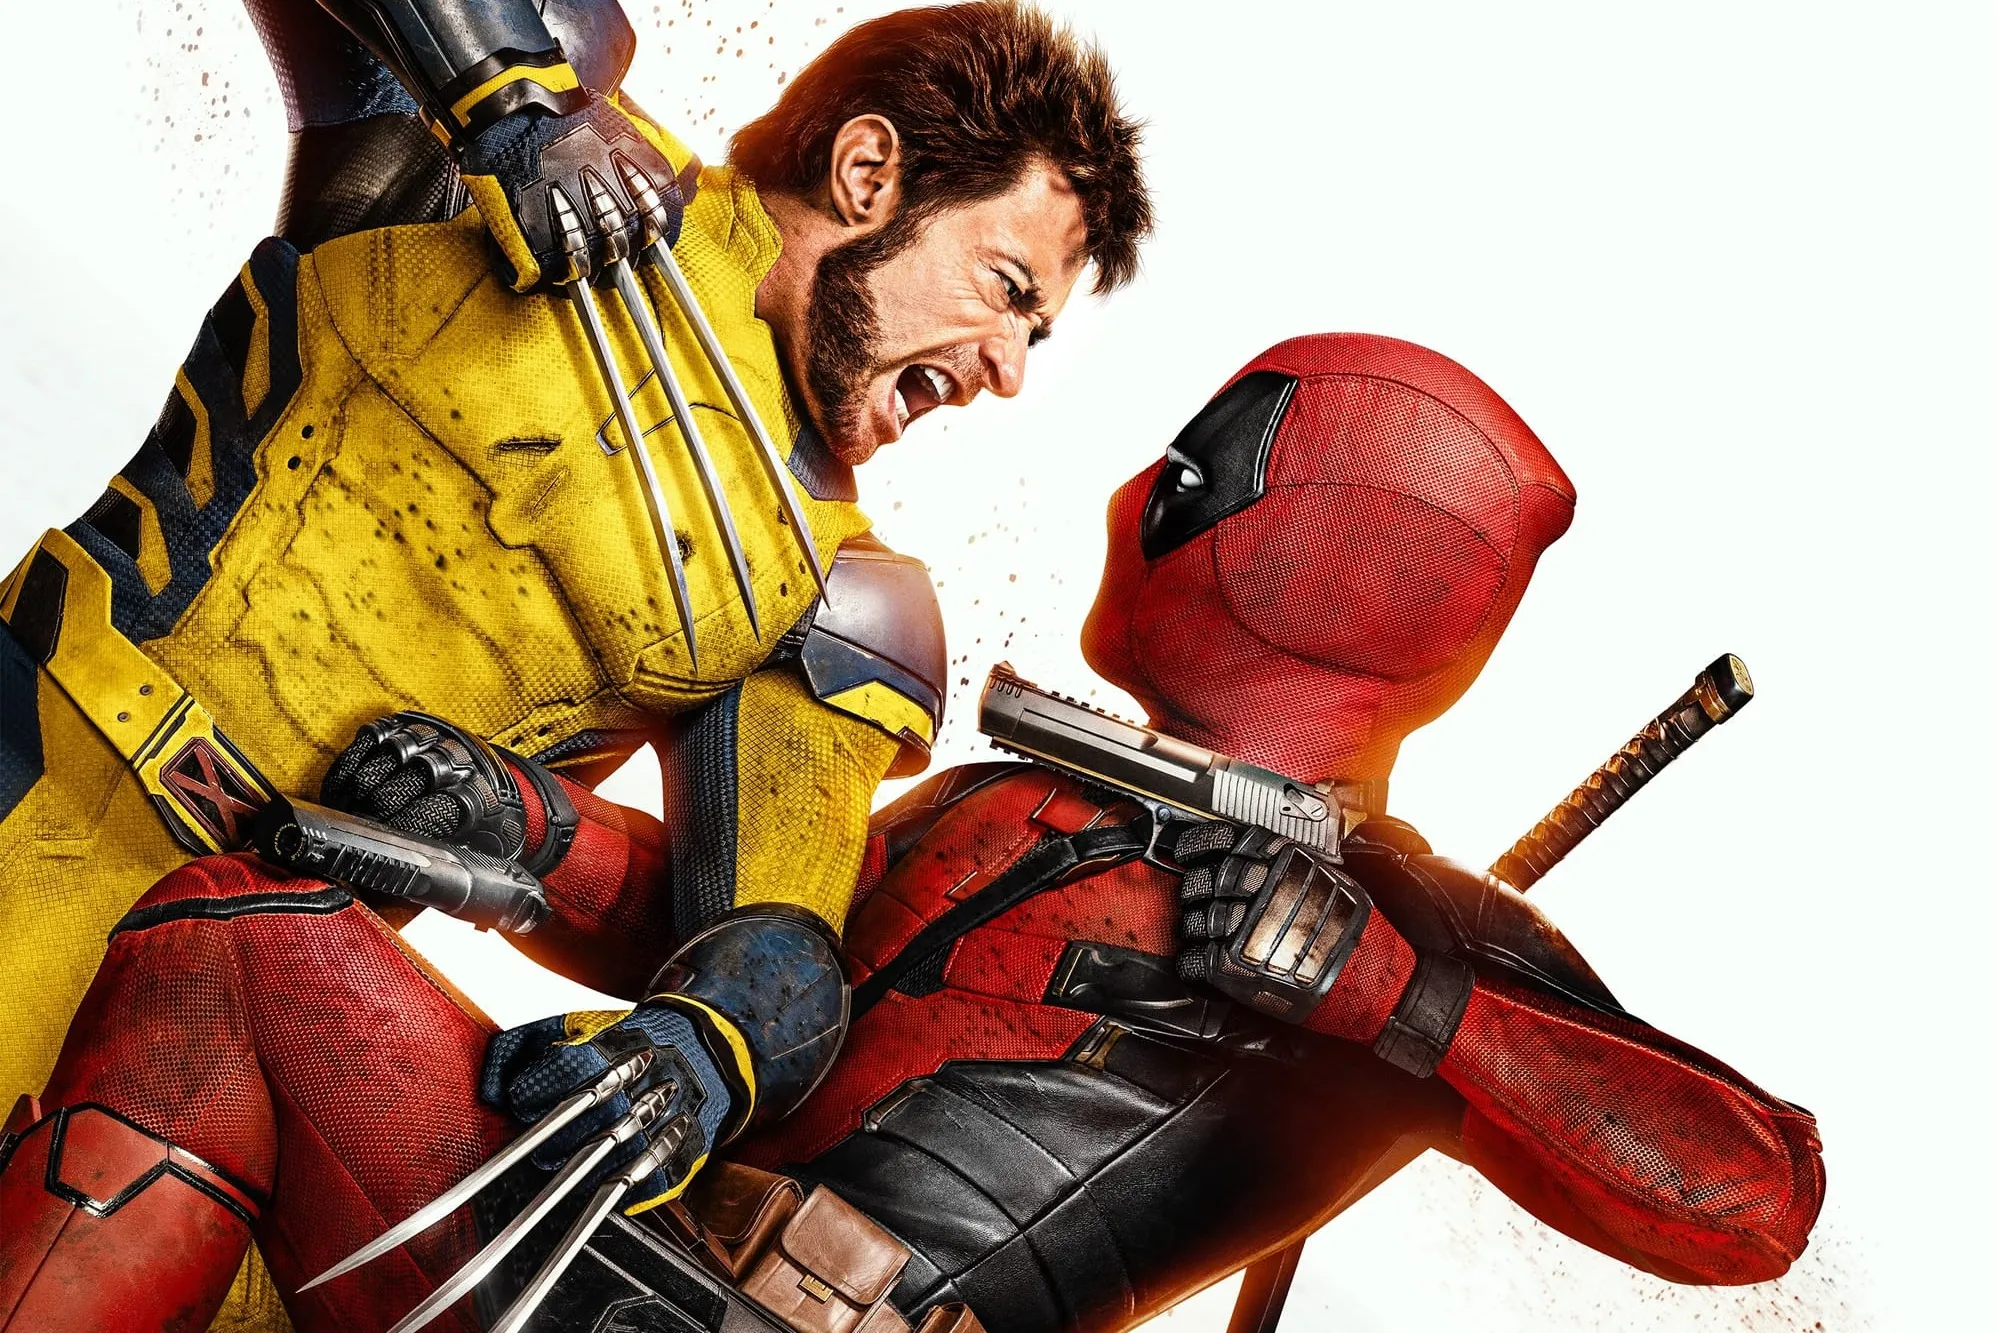 Why the Stakes Are High With 'Deadpool & Wolverine' According to Pete Rock, Rob Markman, and Just Blaze